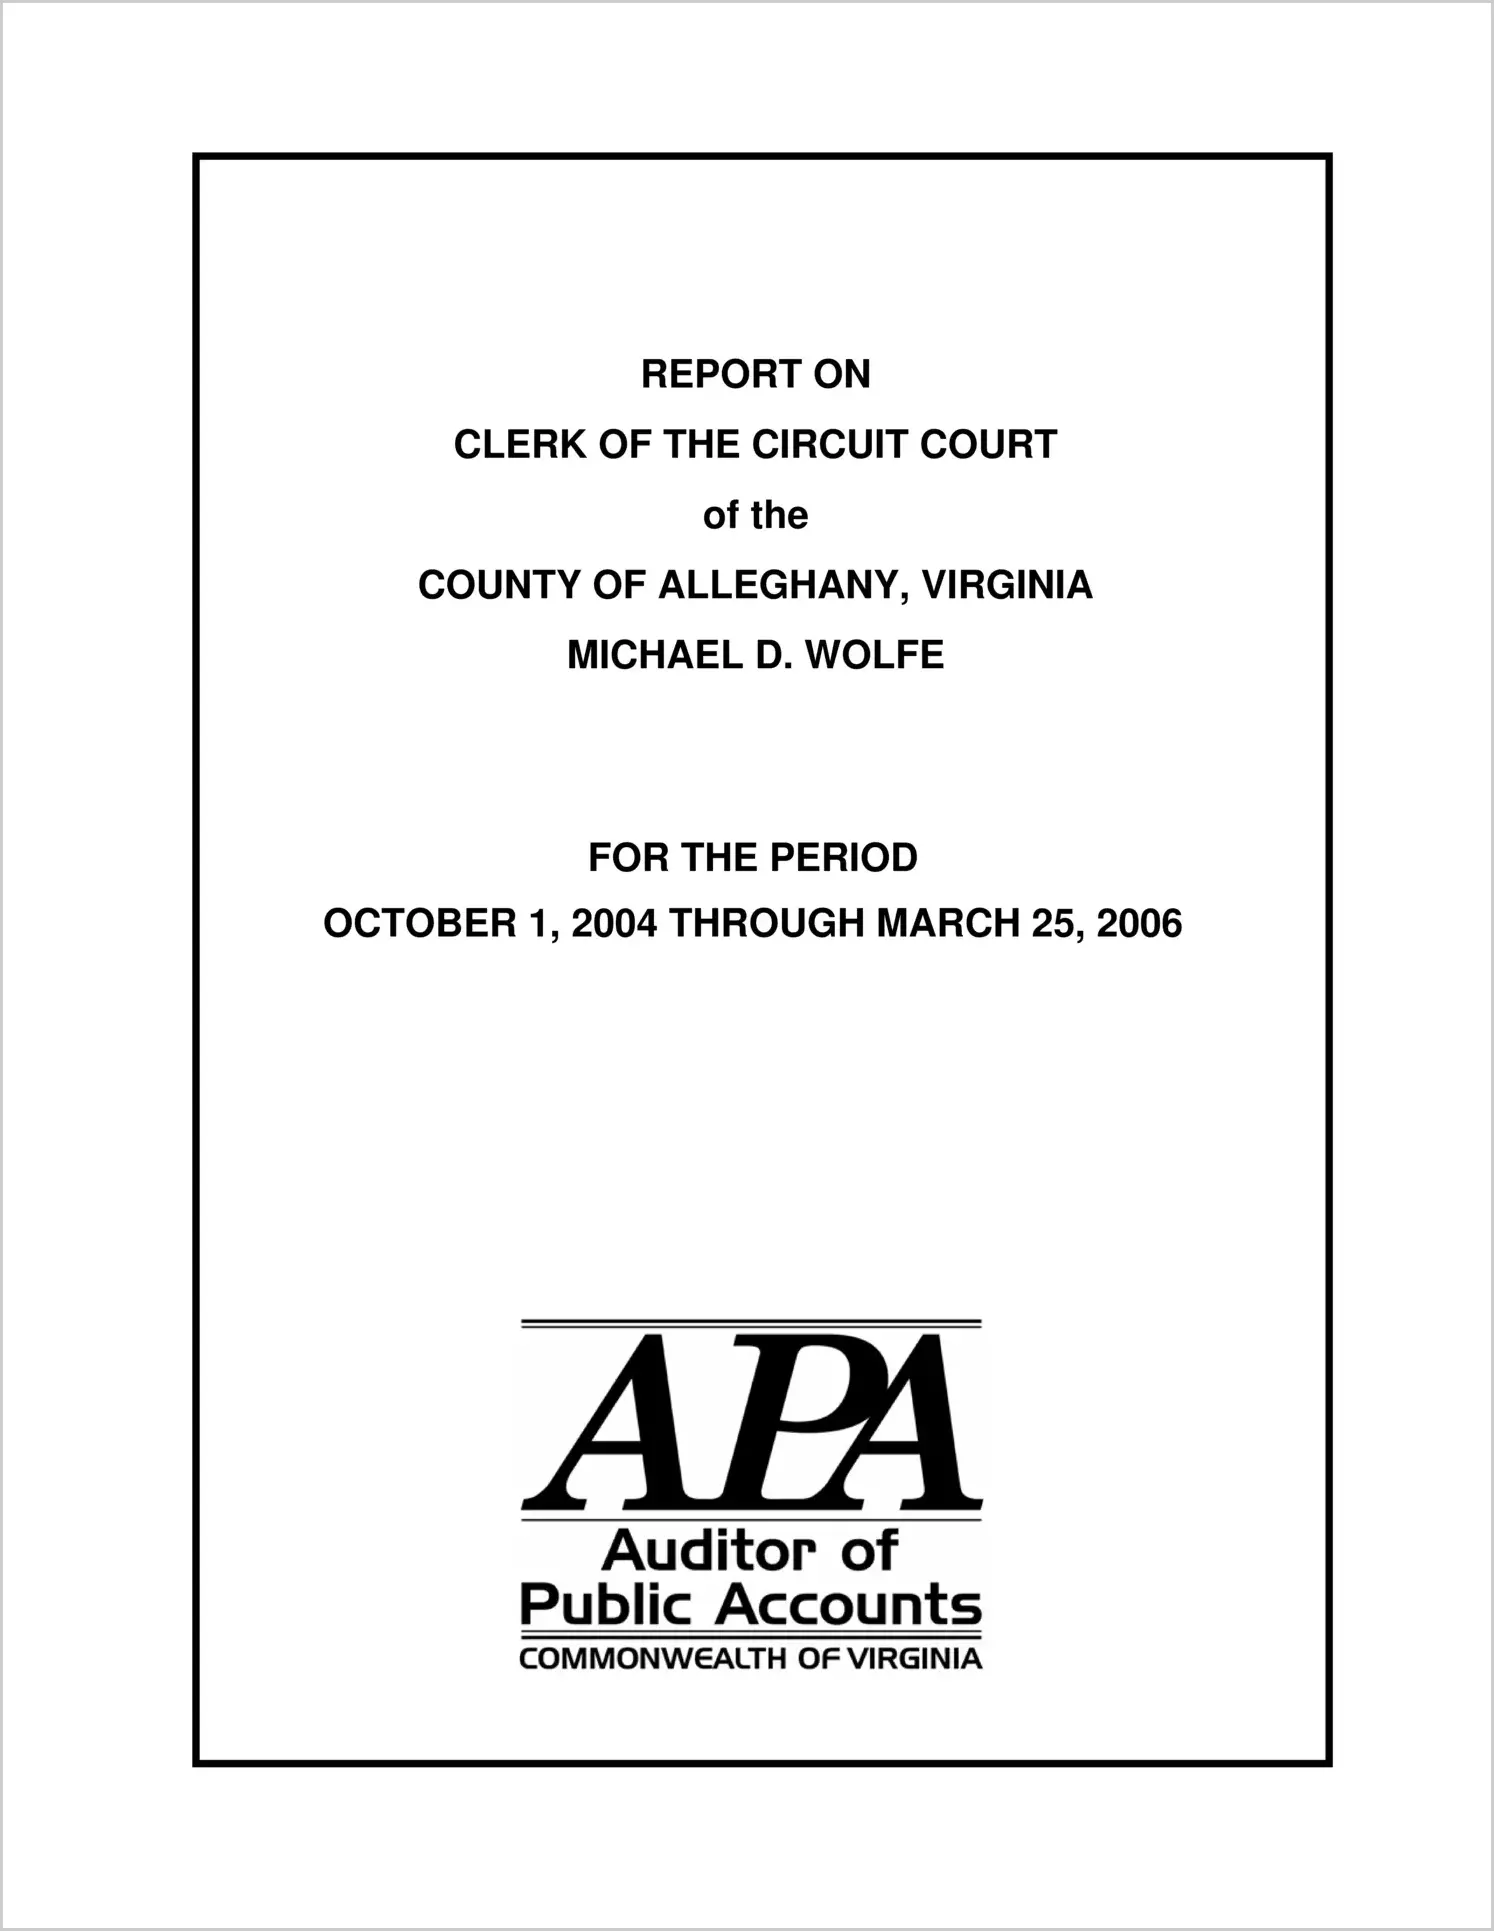 Clerk of the Circuit Court of the County of Alleghany Turnover for the period October 1, 2004 through March 25, 2006